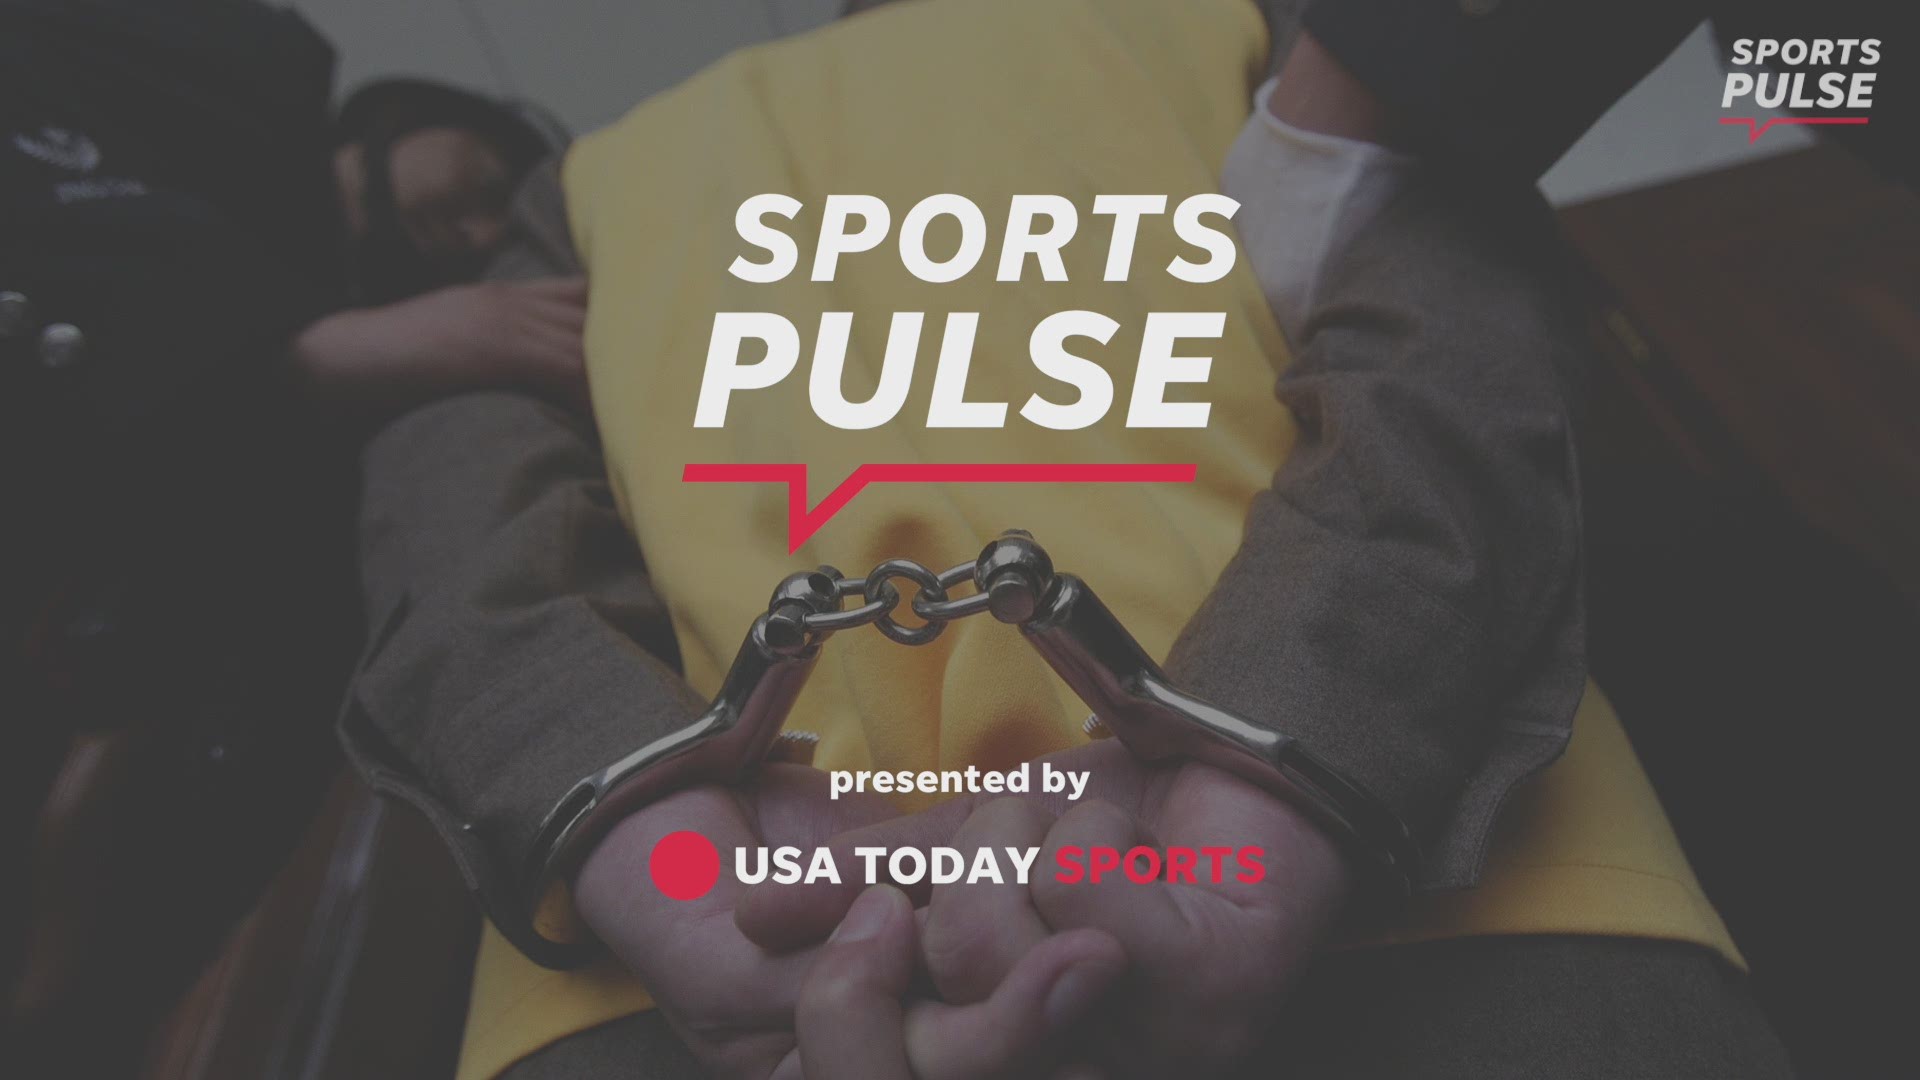 Over the past few years the NFL has made an effort to limit player arrests, and new data indicates that those policies have been a success. USA TODAY Sports